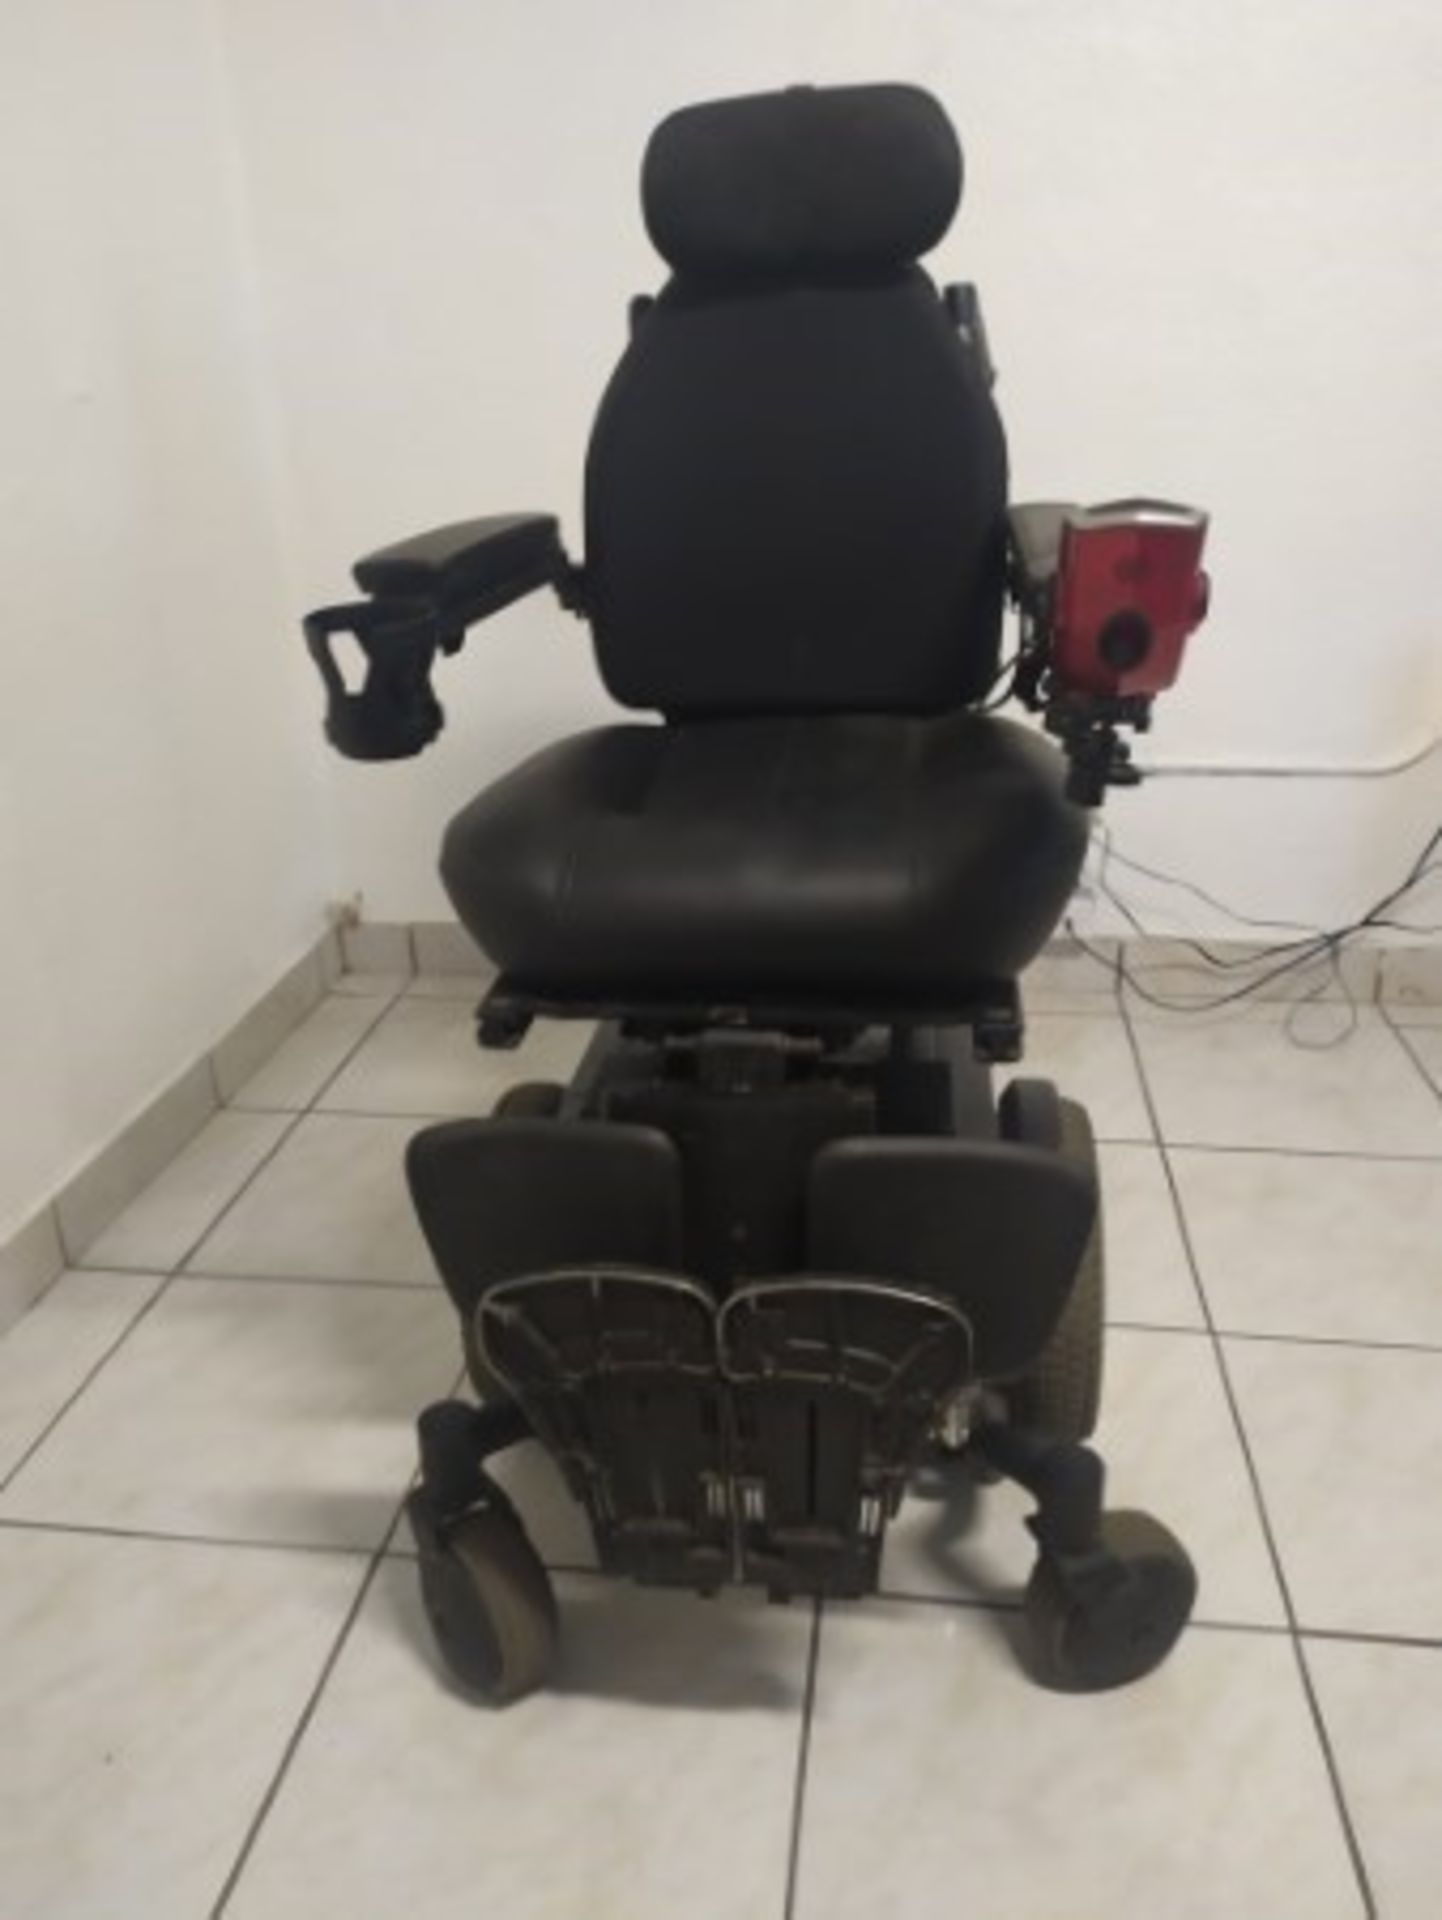 2015 QUANTUM Q6 EDGE 6-WHEEL REHAB POWER CHAIR WITH JOYSTICK CONTROL, KEYBOARD, RECLINING SEAT WITH